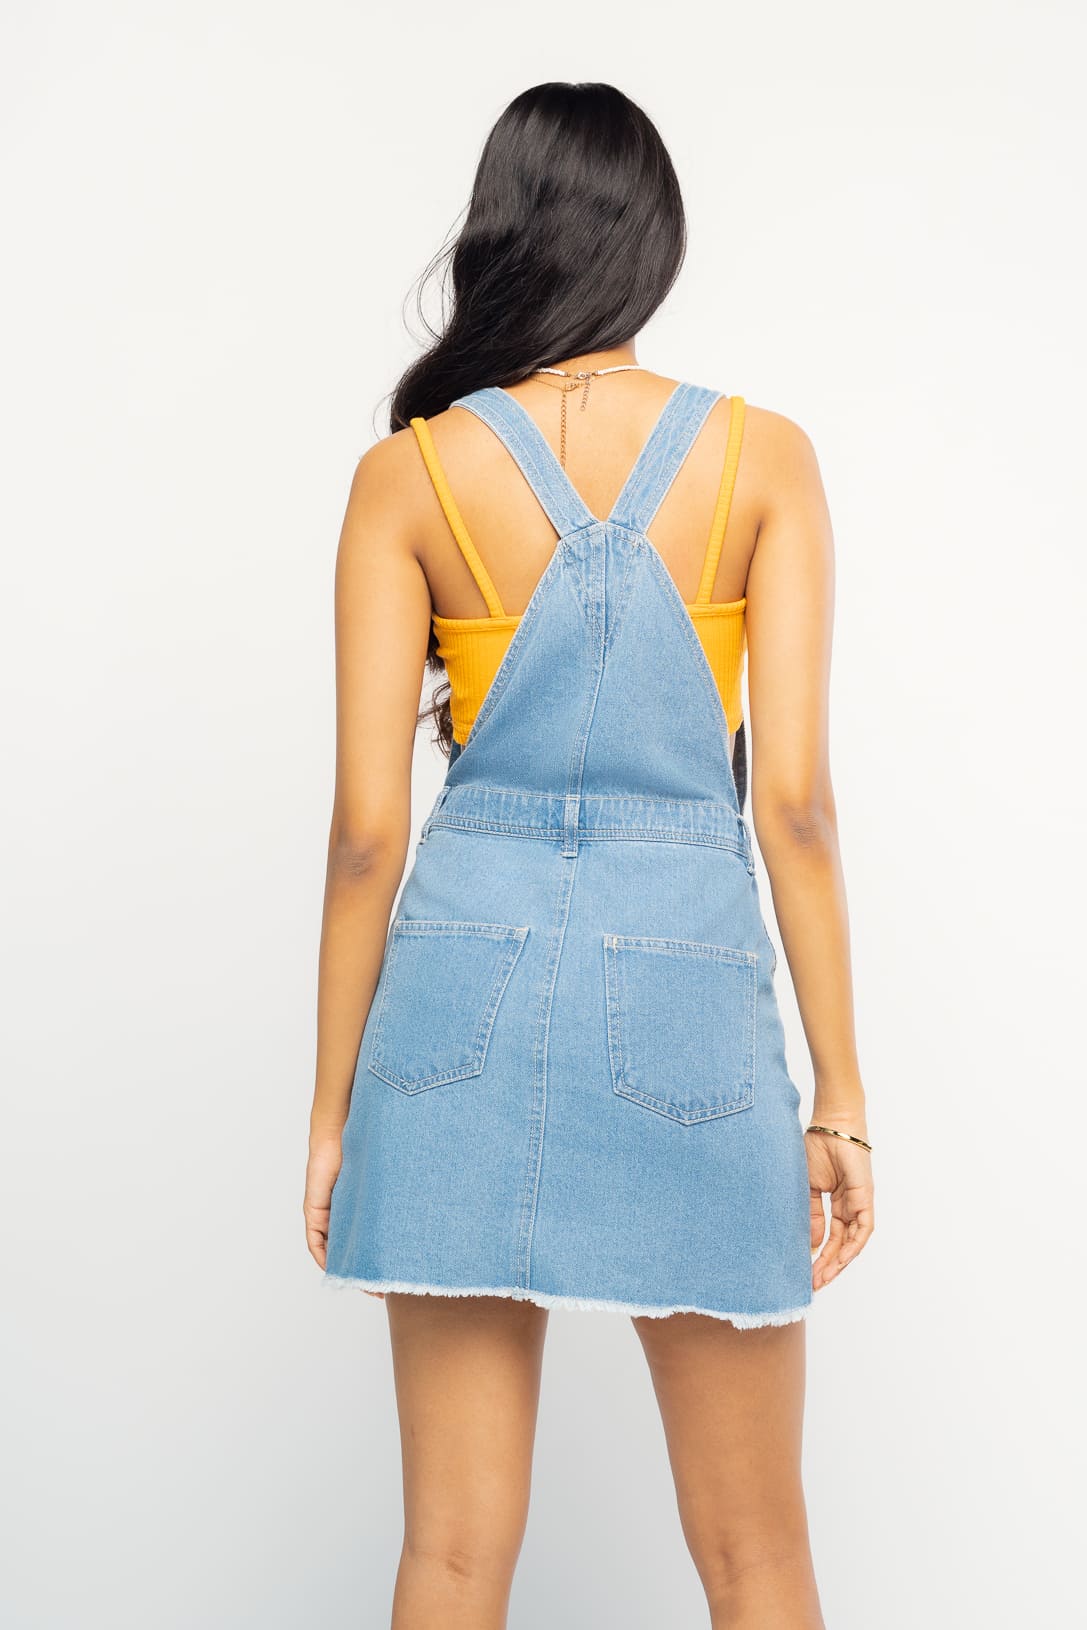 Buy PepTrends Women's Mini Dungaree (JS16148BL_X-Small_Blue_X-Small) at  Amazon.in